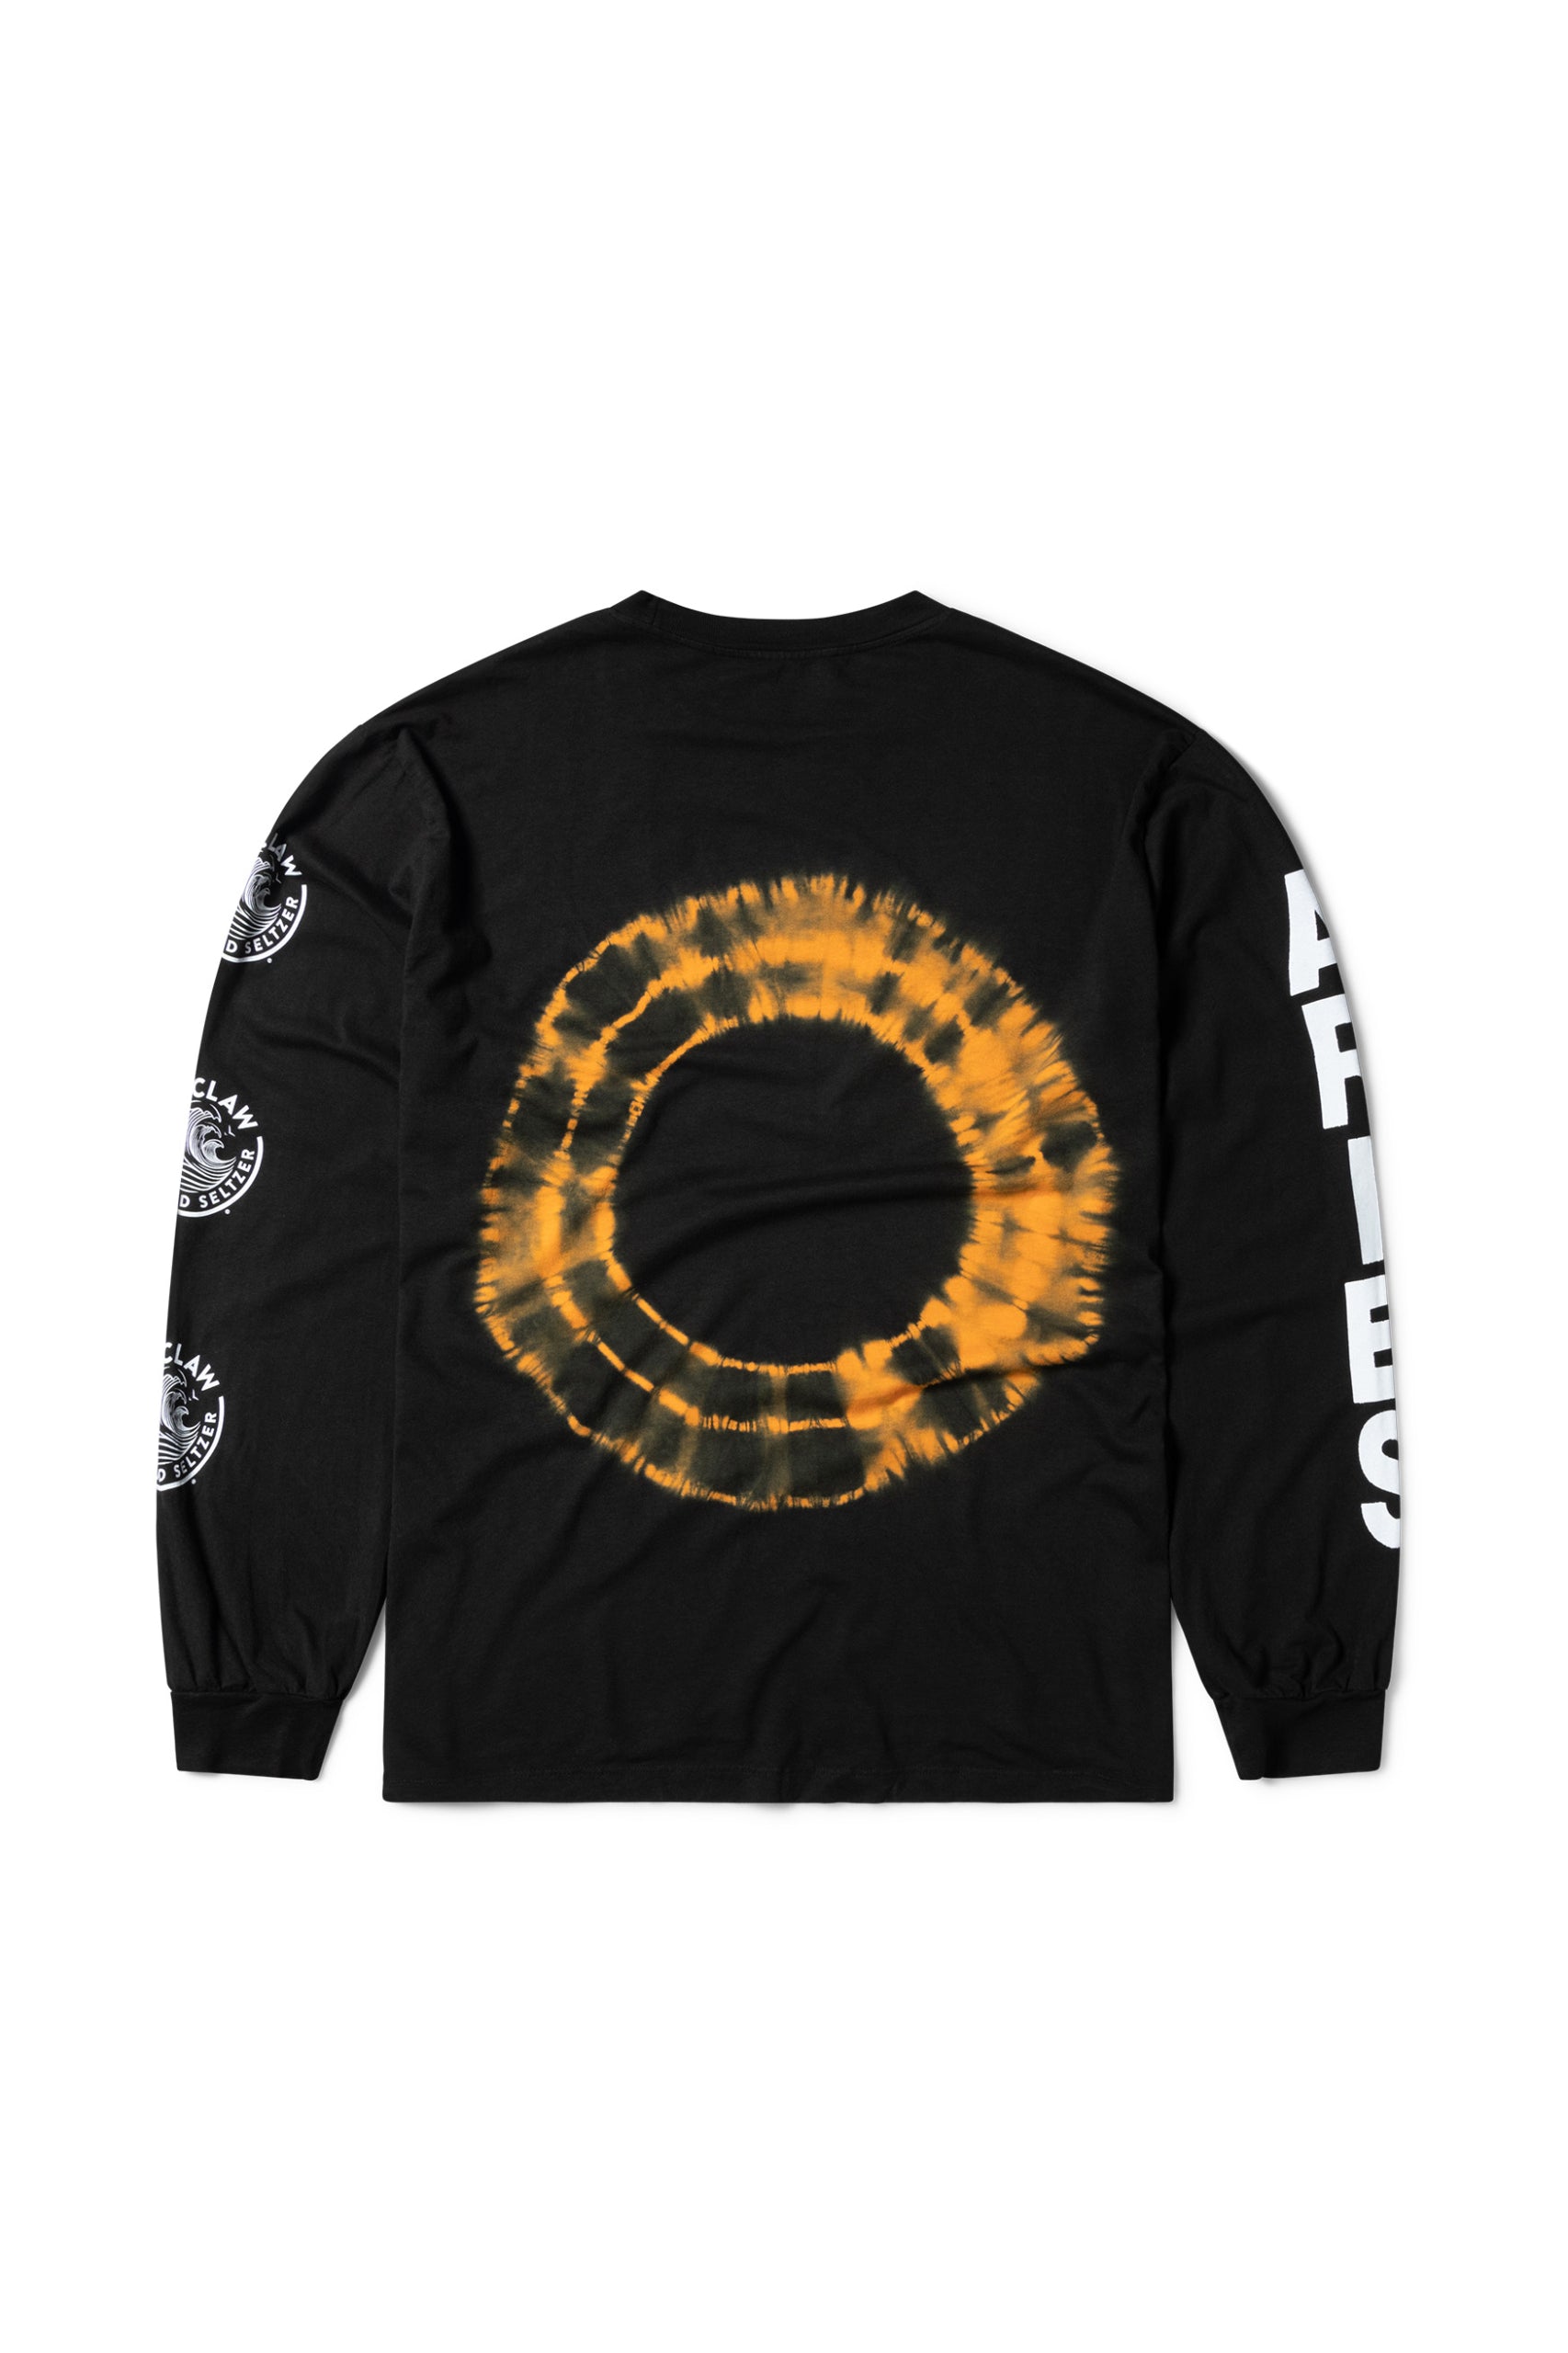 Load image into Gallery viewer, White Claw LS Tee